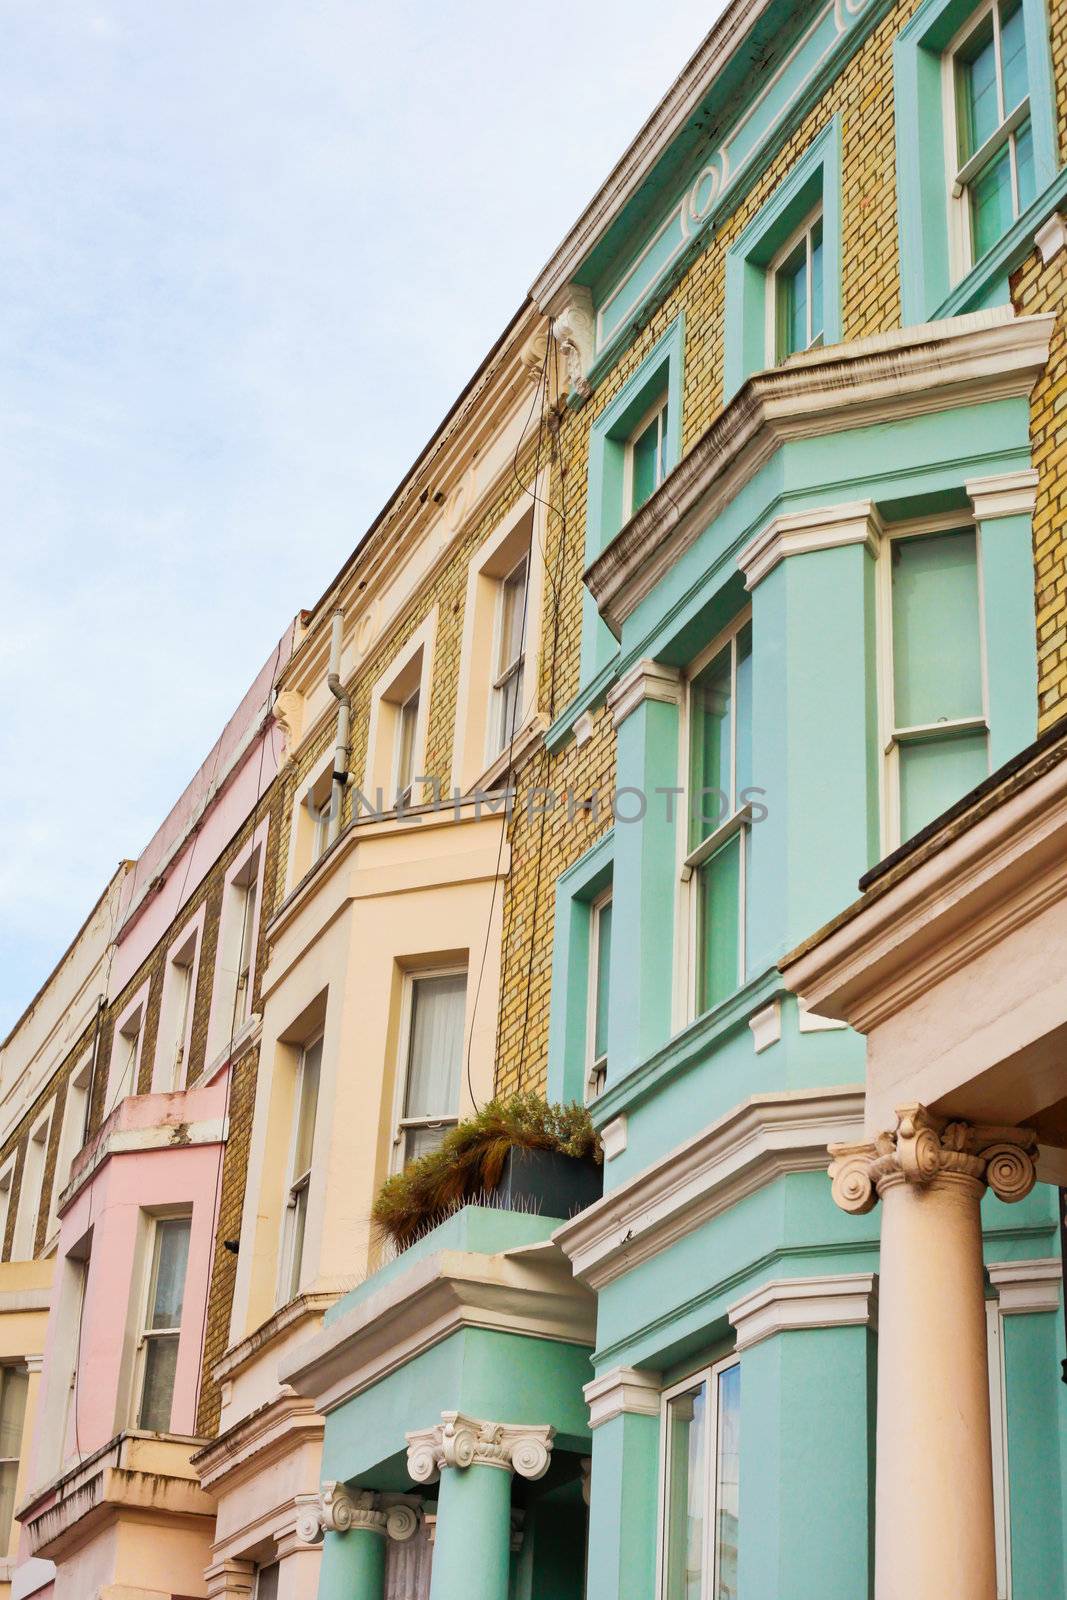 Colorful london town houses in the Notting Hill area